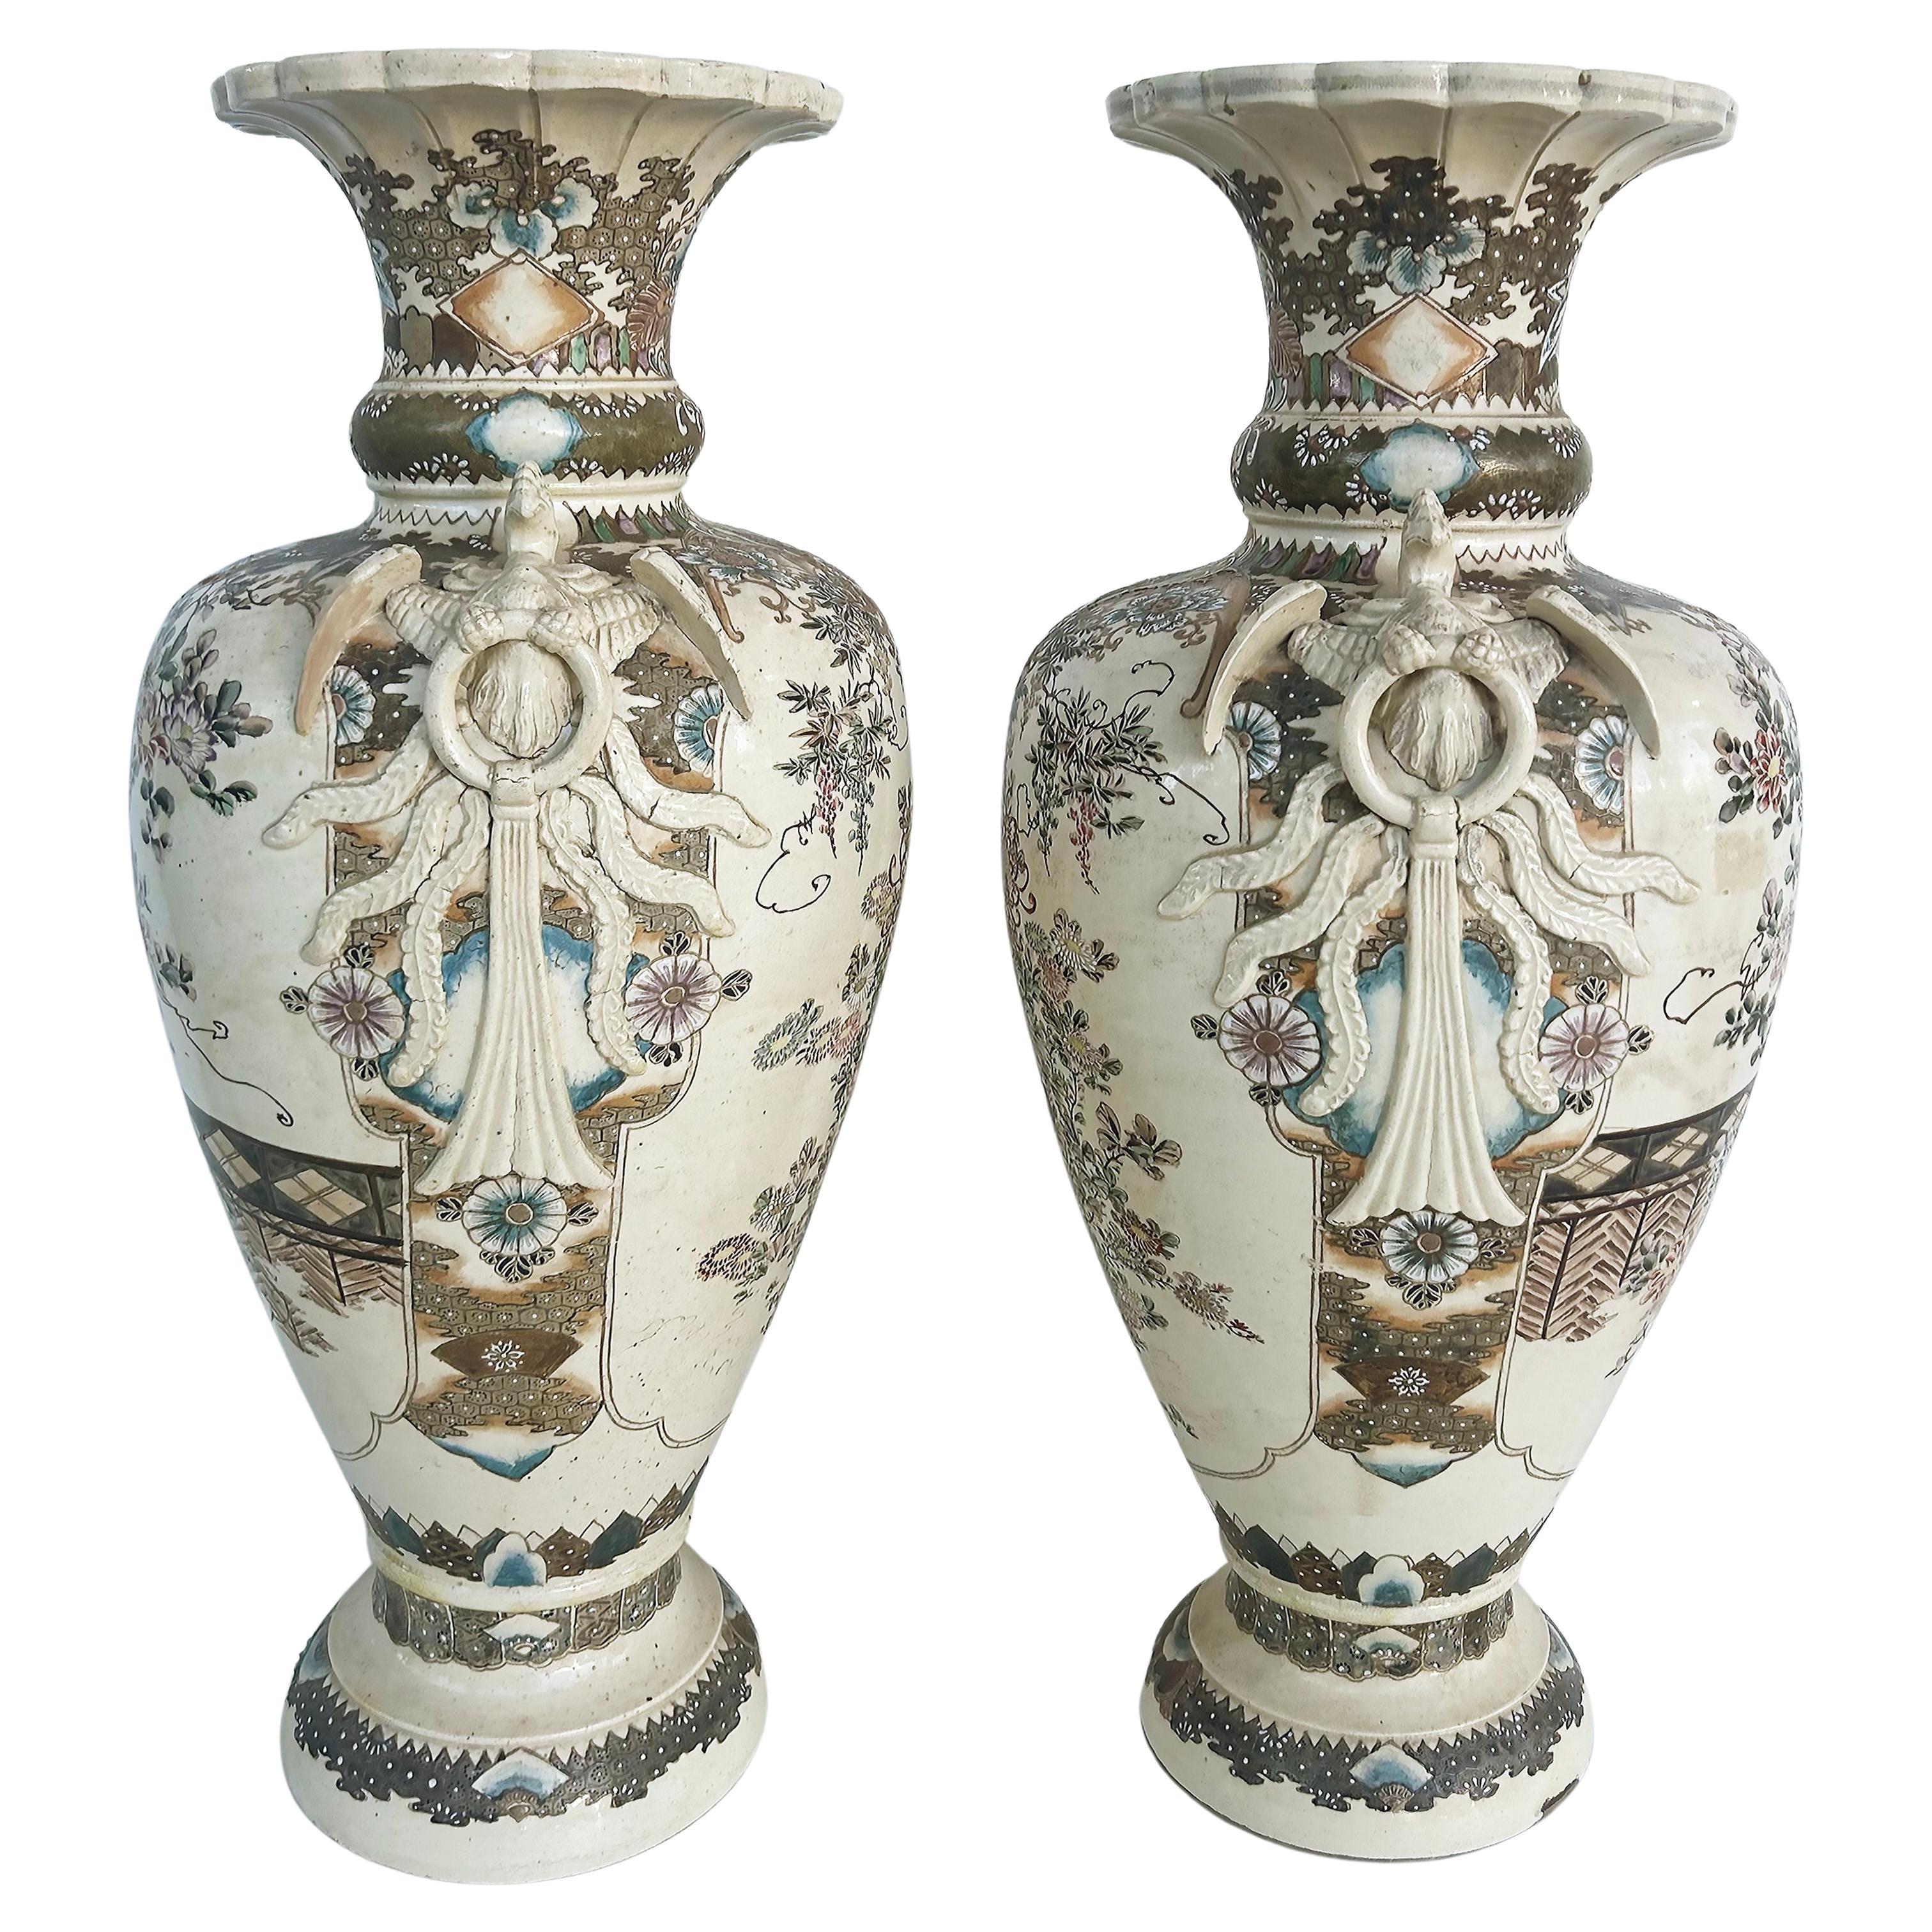 Monumental Japanese Satsuma Vases Artist Signed, An Impressive Pair Estate Fresh

Offered for sale is a pair of monumental Japanese hand-painted and artist signed Satsuma vases which are a recent acquisition from the Key Biscayne, Florida estate of 